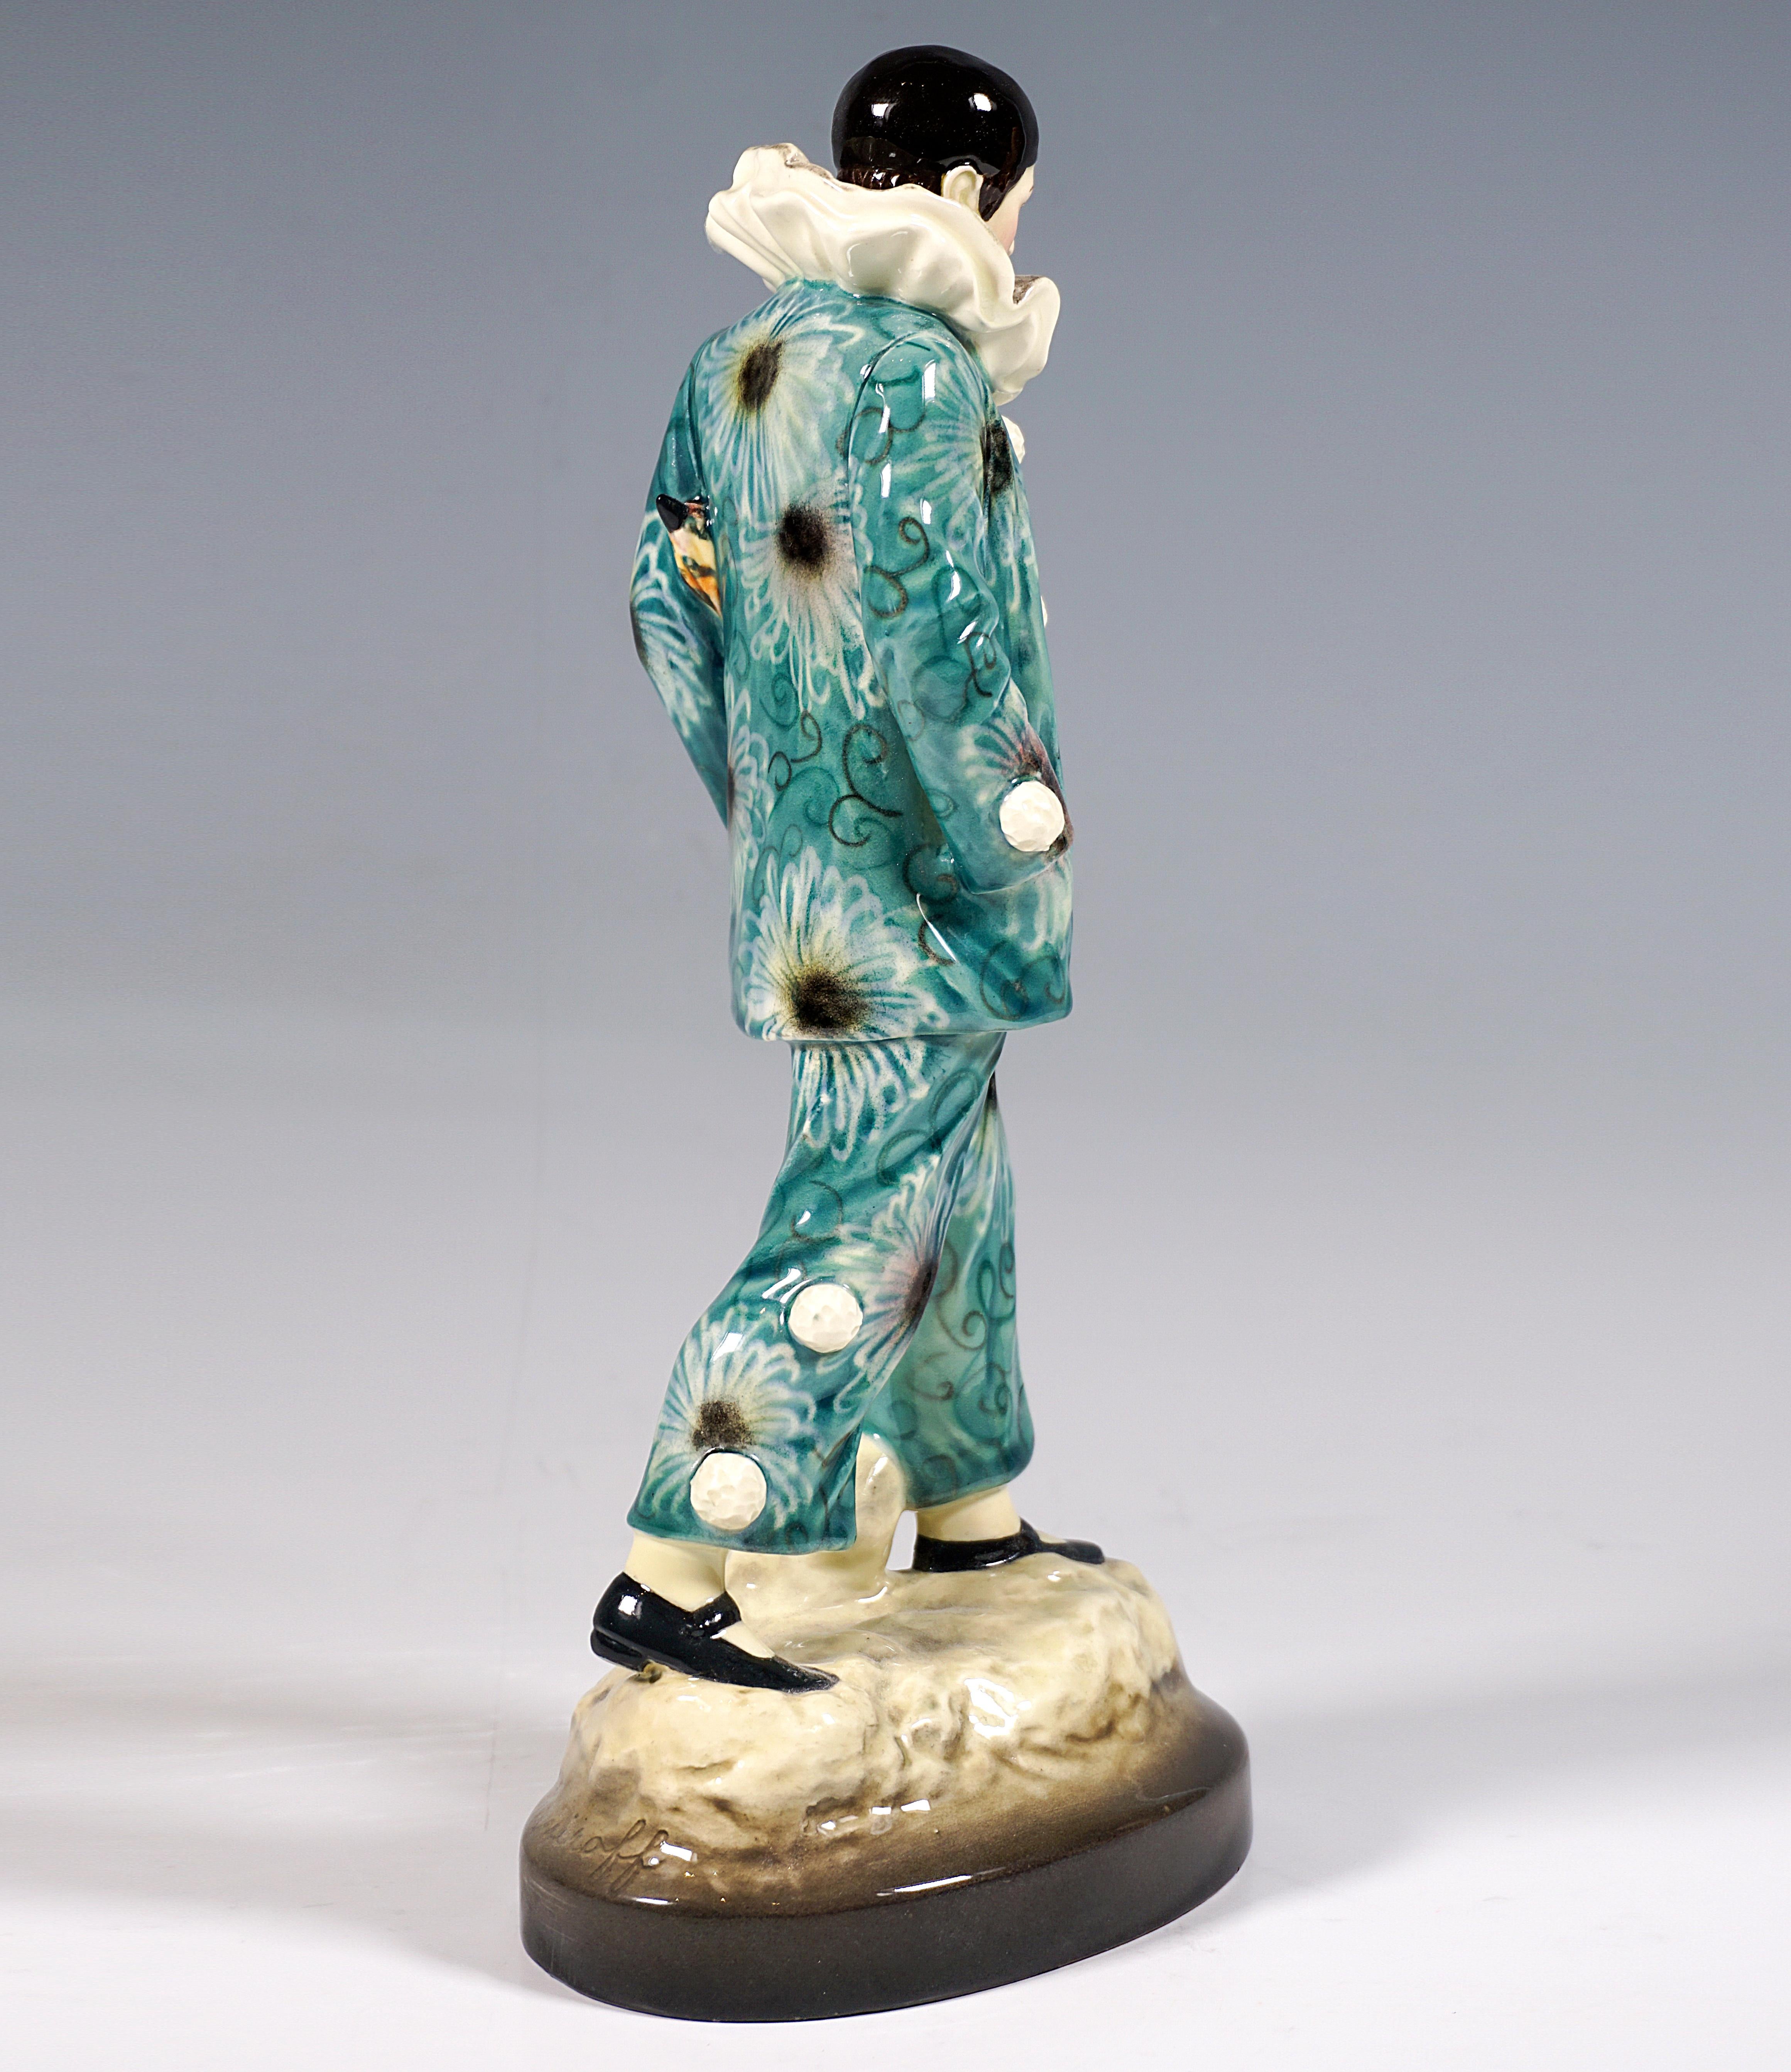 Exceptional Goldscheider Figurine of the 1920s after an Art Nouveau Design:
Representation of a thoughtfully walking harlequin in an elaborate costume decorated with a large floral pattern in turquoise and shades of gray, white tassel buttons,